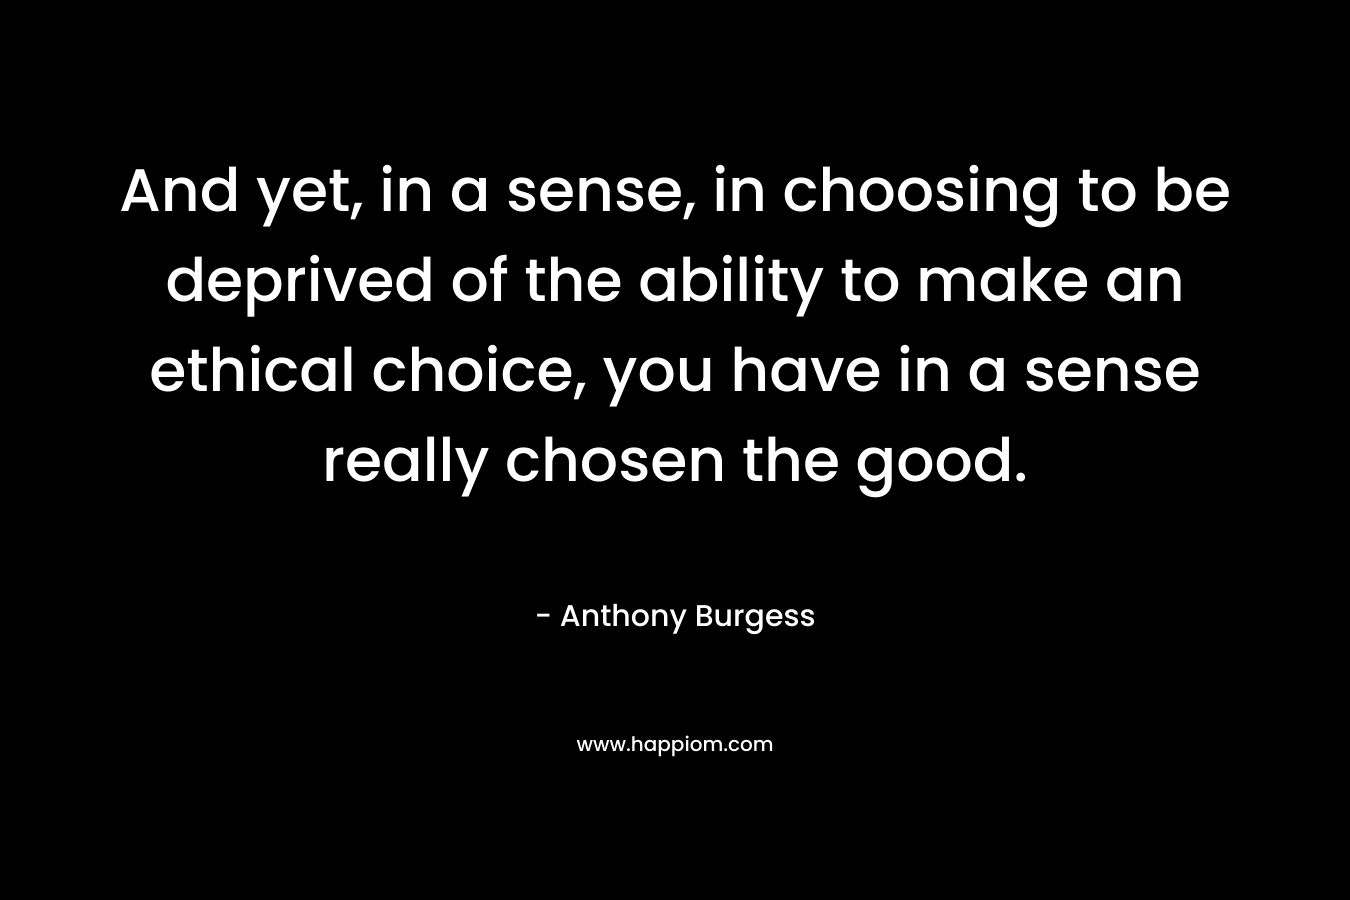 And yet, in a sense, in choosing to be deprived of the ability to make an ethical choice, you have in a sense really chosen the good. – Anthony Burgess